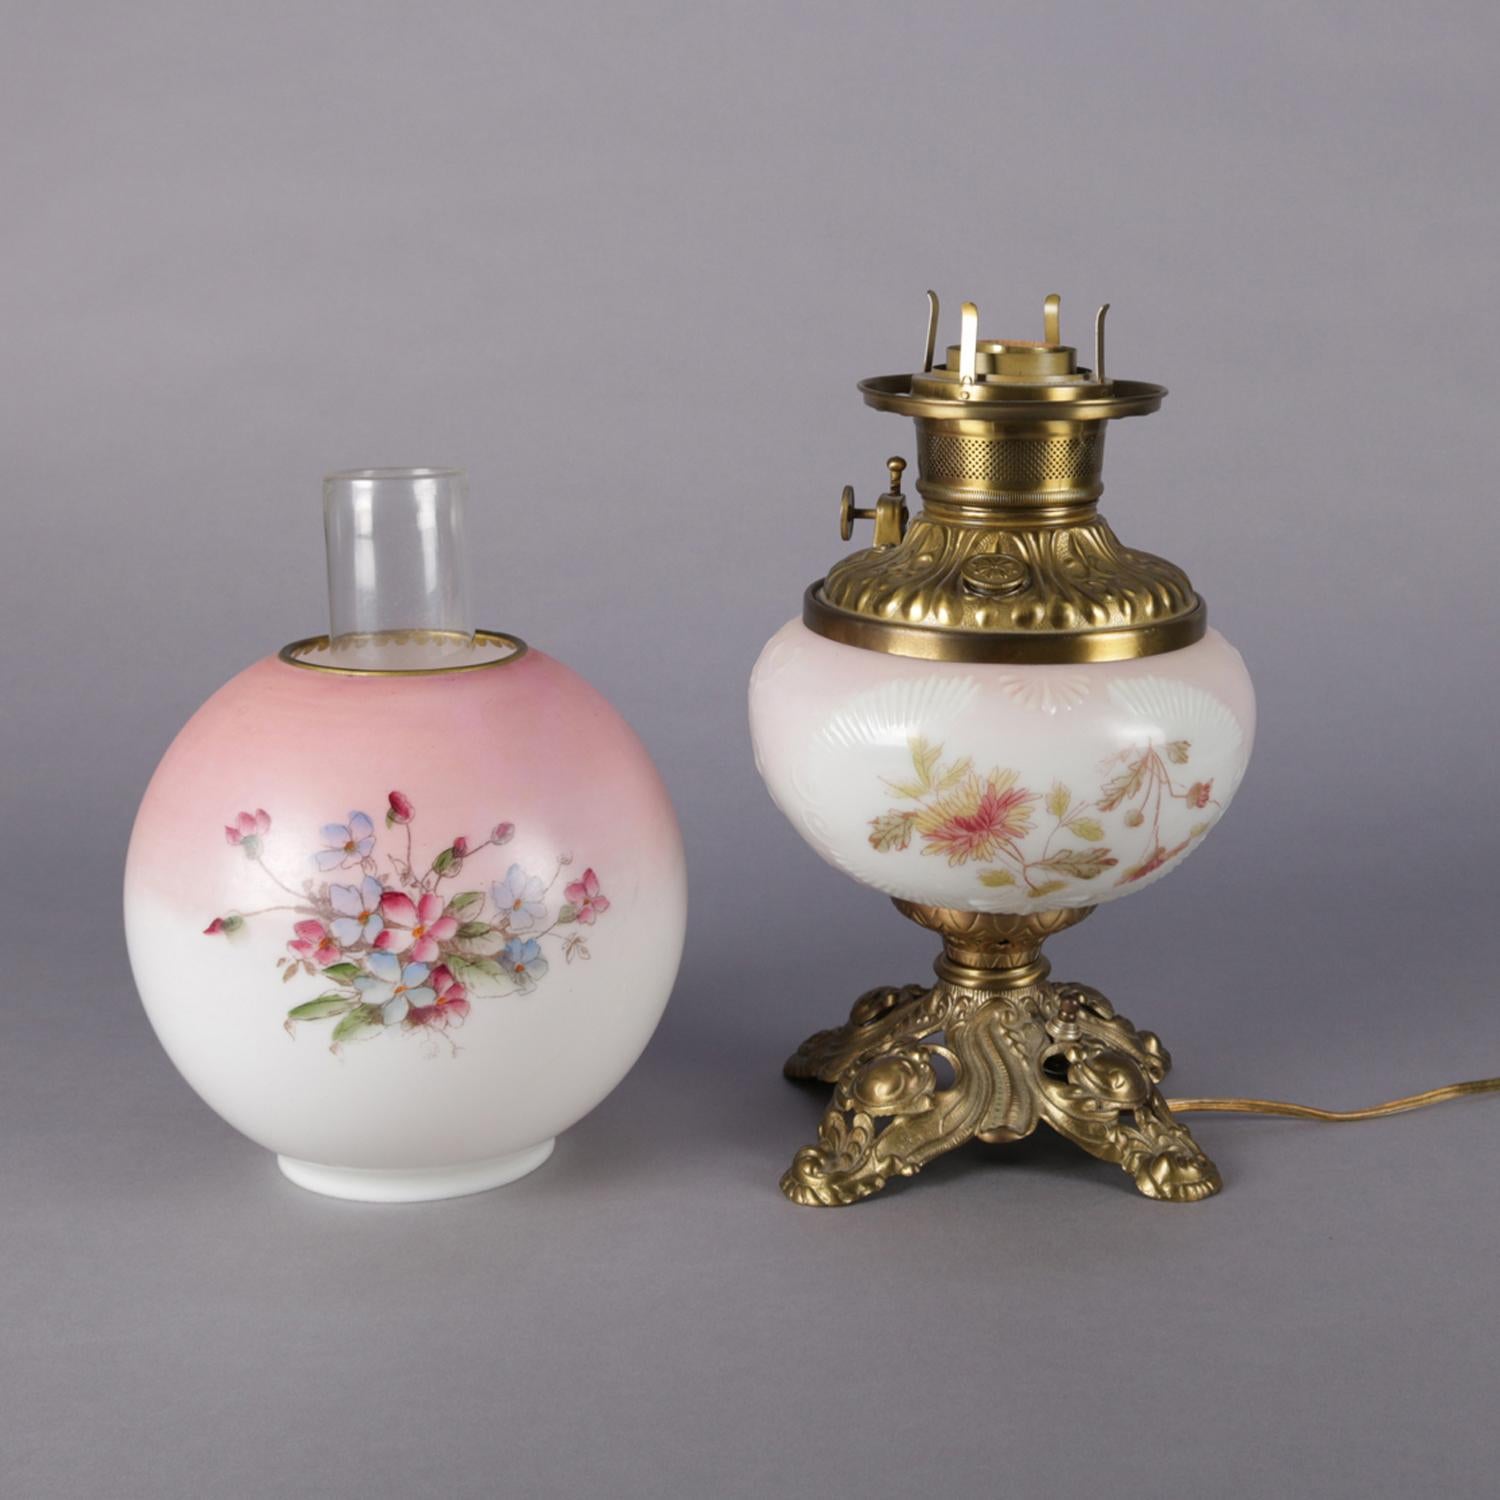 American Electrified Hand-Painted Floral and Brass Gone-With-The-Wind Lamp, 19th Century